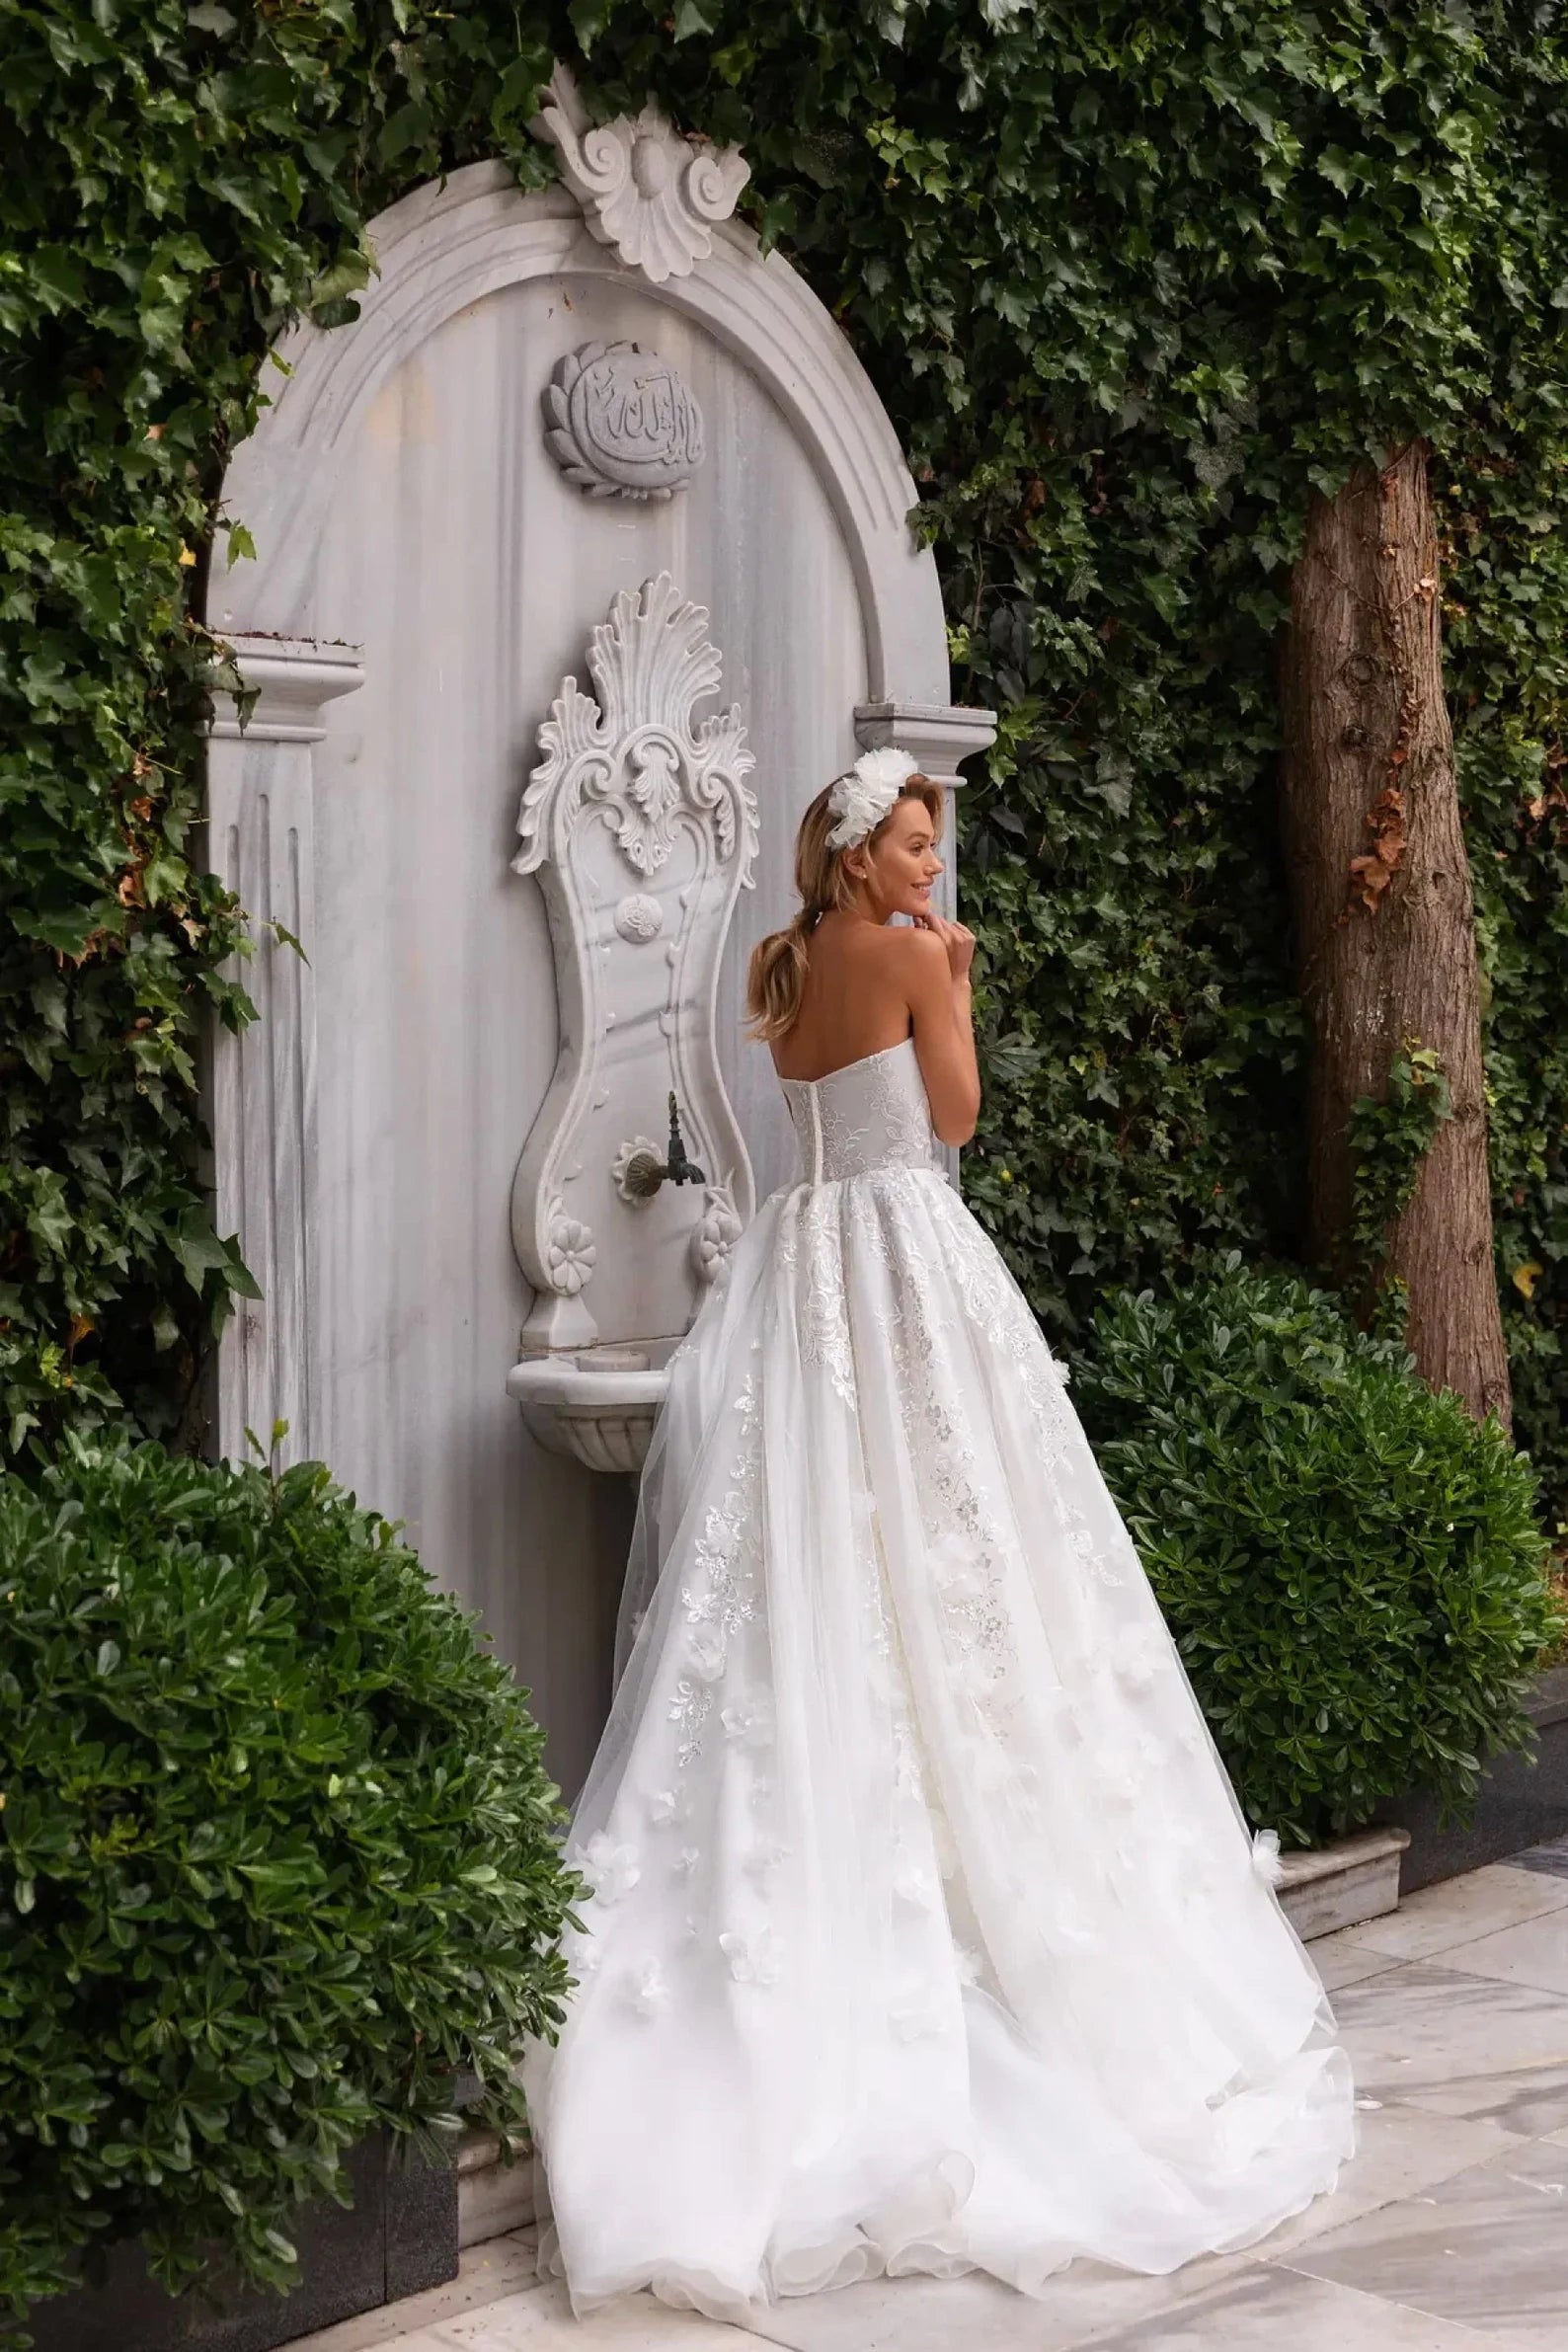 A-line Elegant Wedding Gowns, Strapless Lace Bridal Gowns, Newest Wedding Dresses